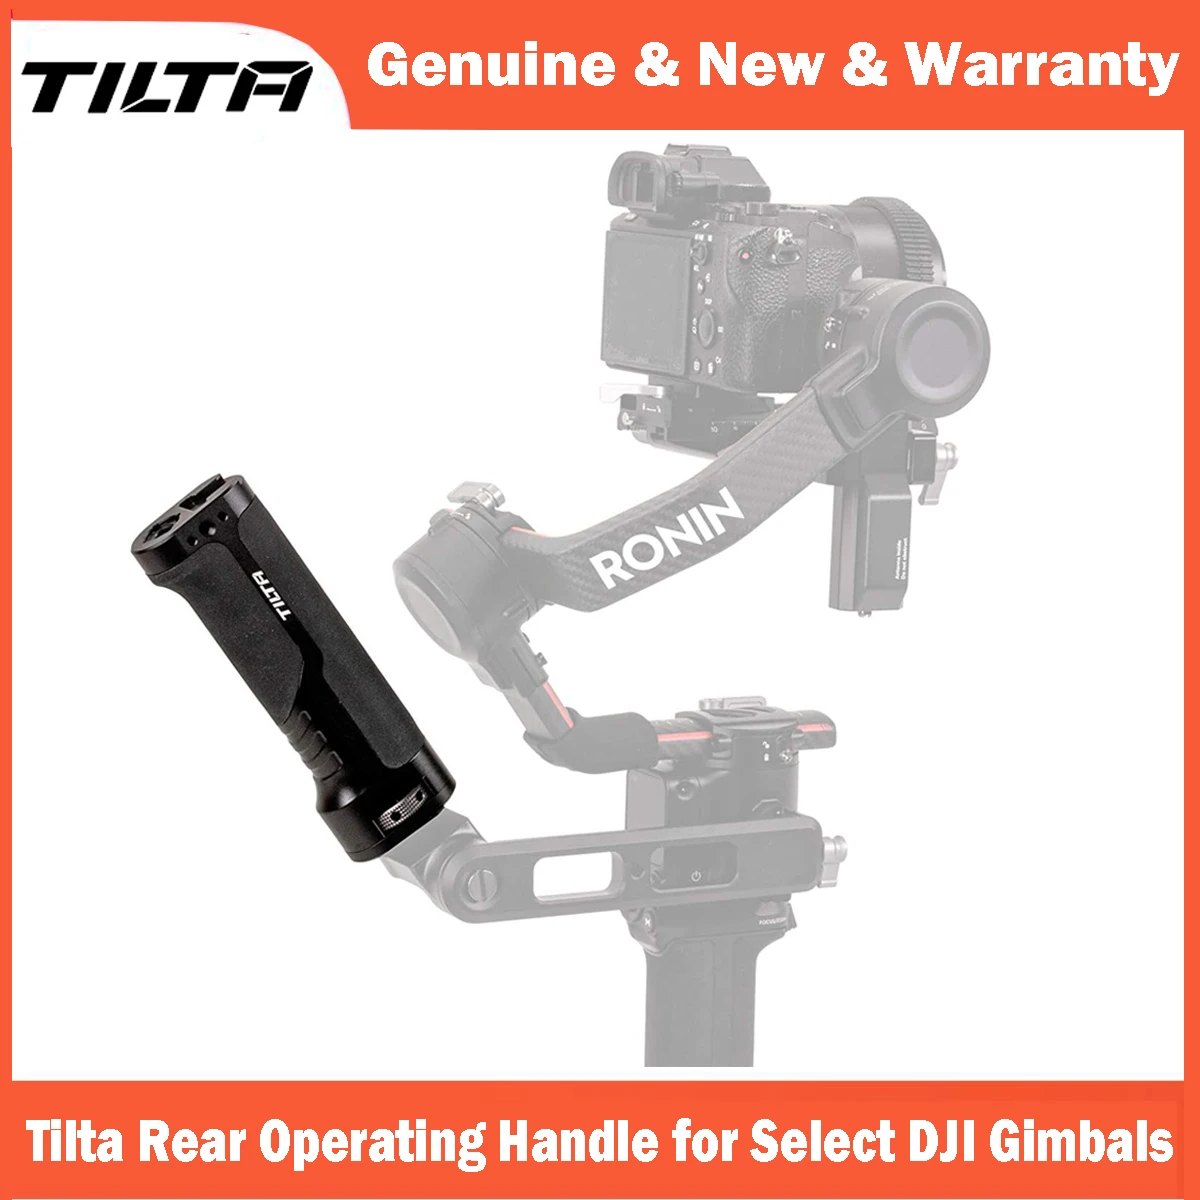 

Tilta TGA-BRH Rear Operating Handle Extended Grip Replaces Tripod for DJI RS3, RS3 PRO, RS2 and RSC2 Gimbal via Cold Shoe